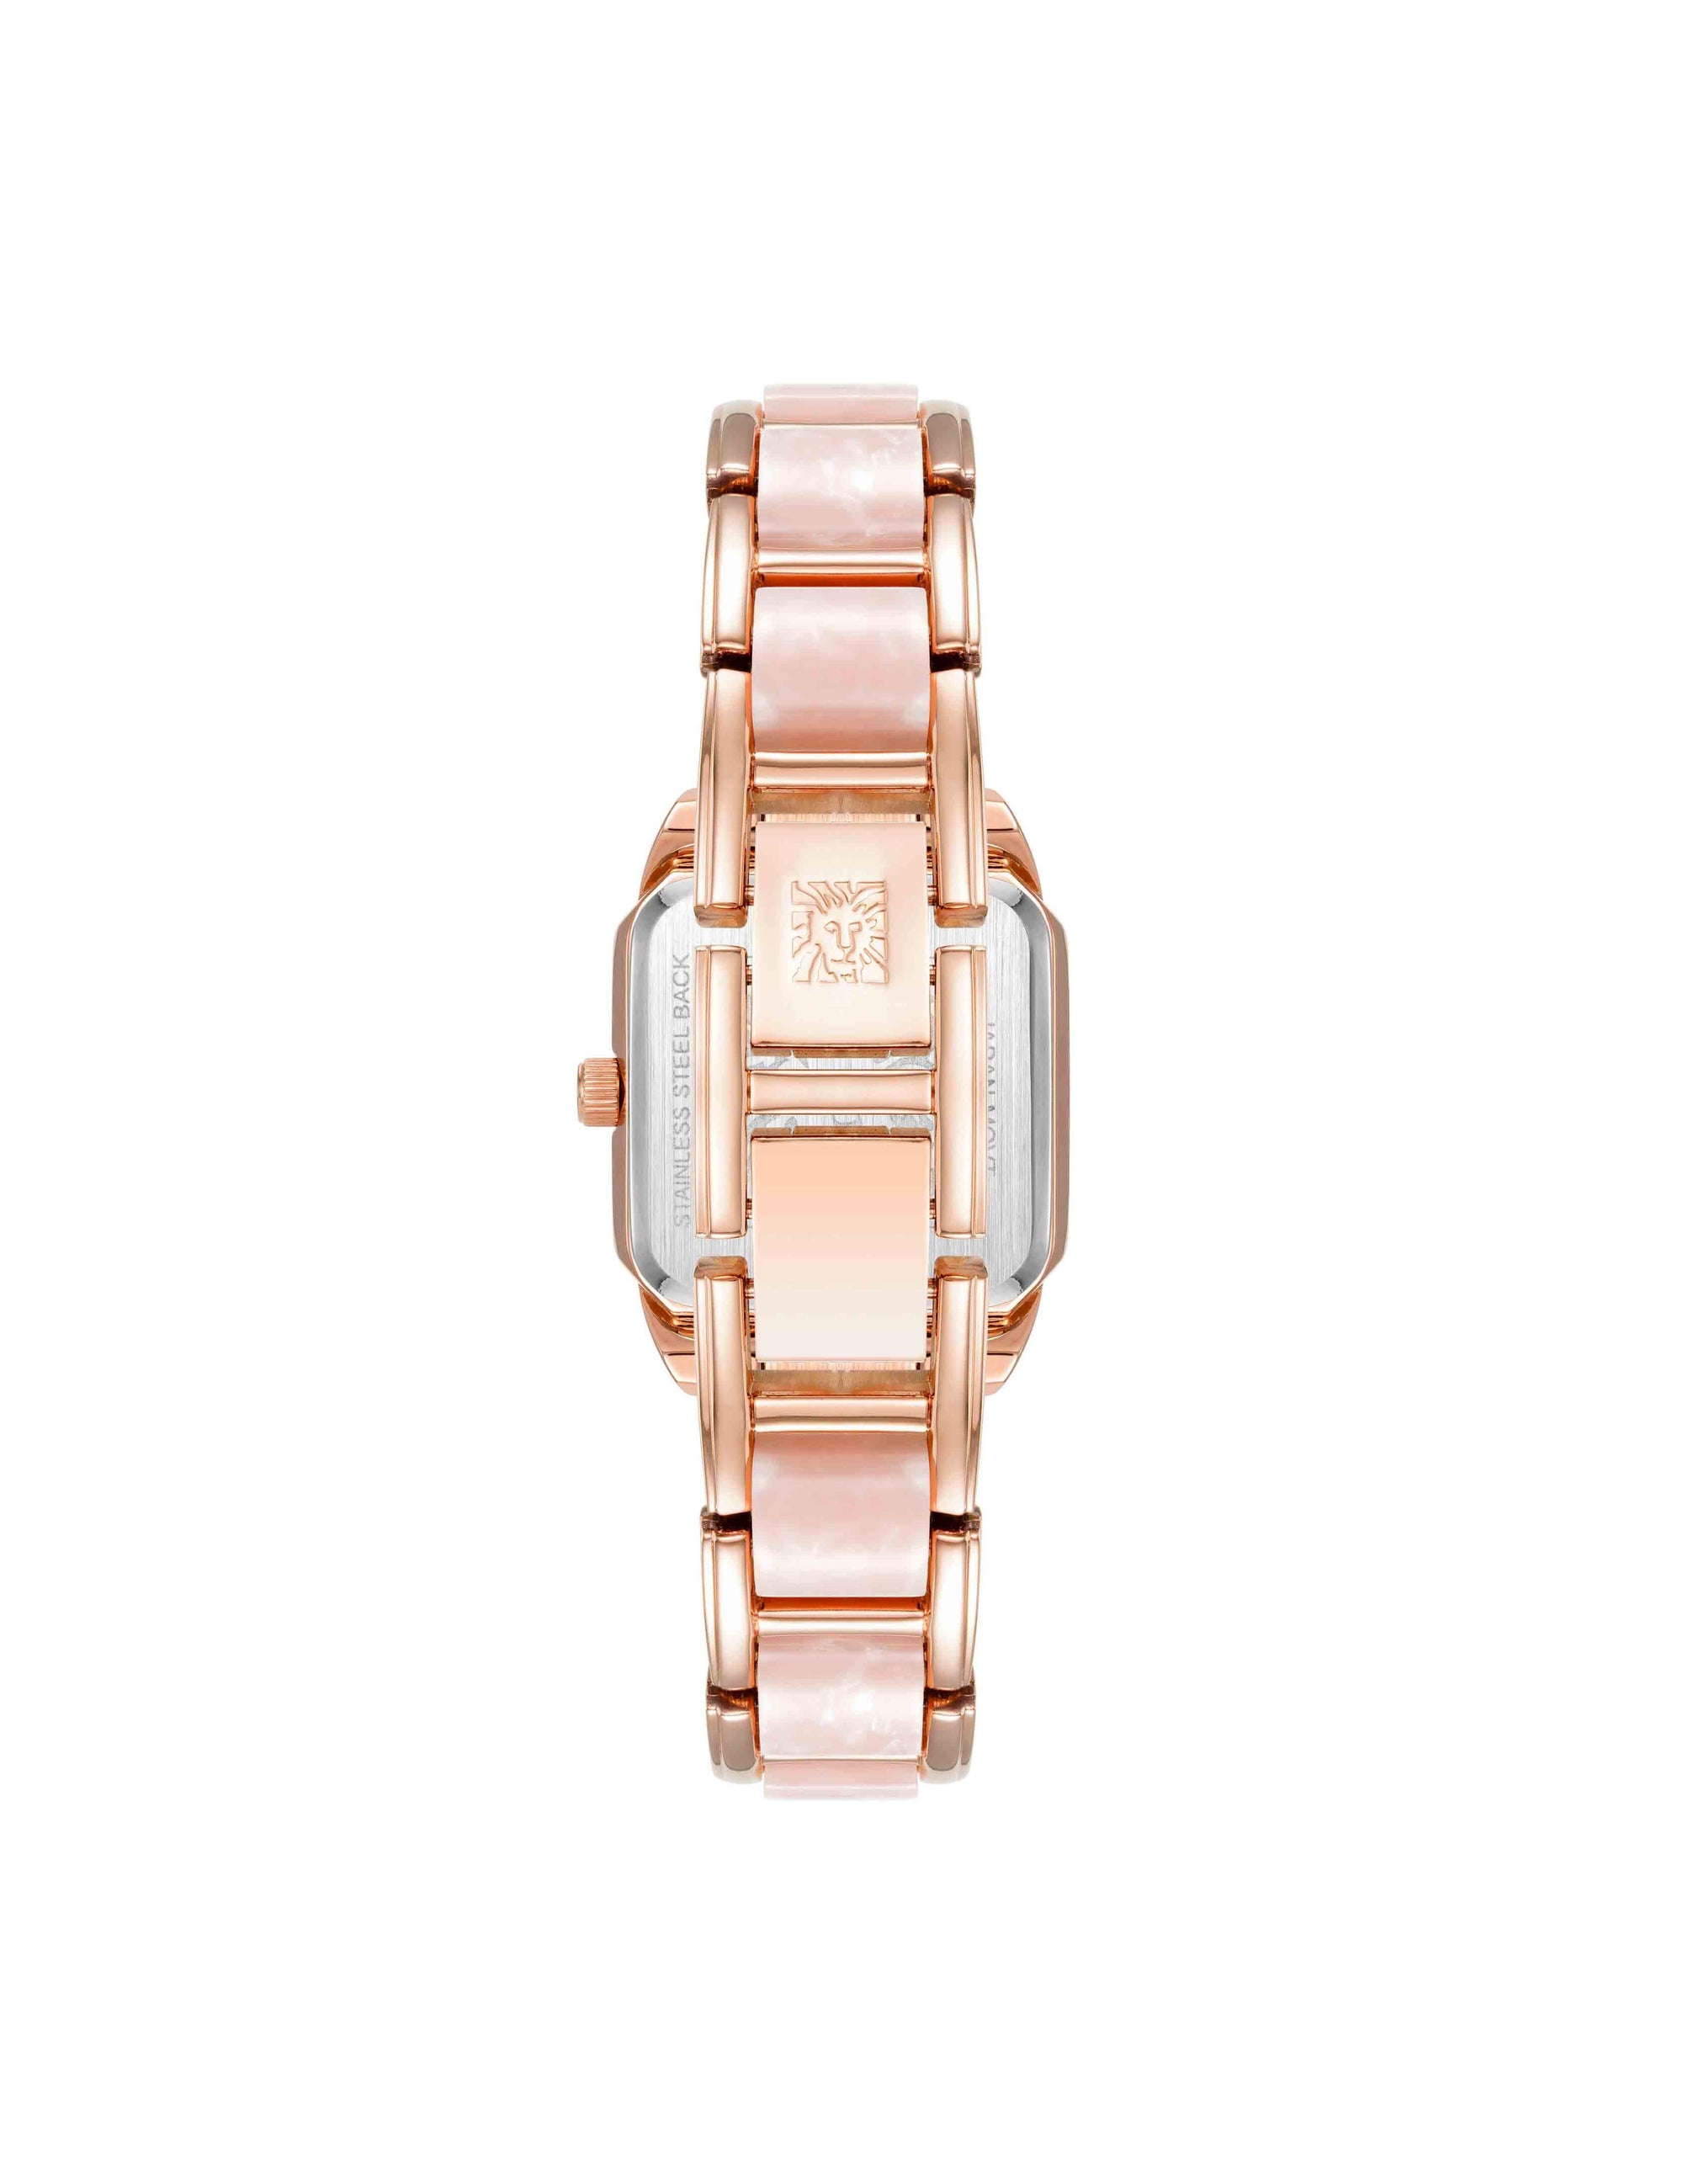 Anne Klein Anne Klein's May Newness Analog Watch - For Women - Buy Anne  Klein Anne Klein's May Newness Analog Watch - For Women AK3344GNRG Online  at Best Prices in India